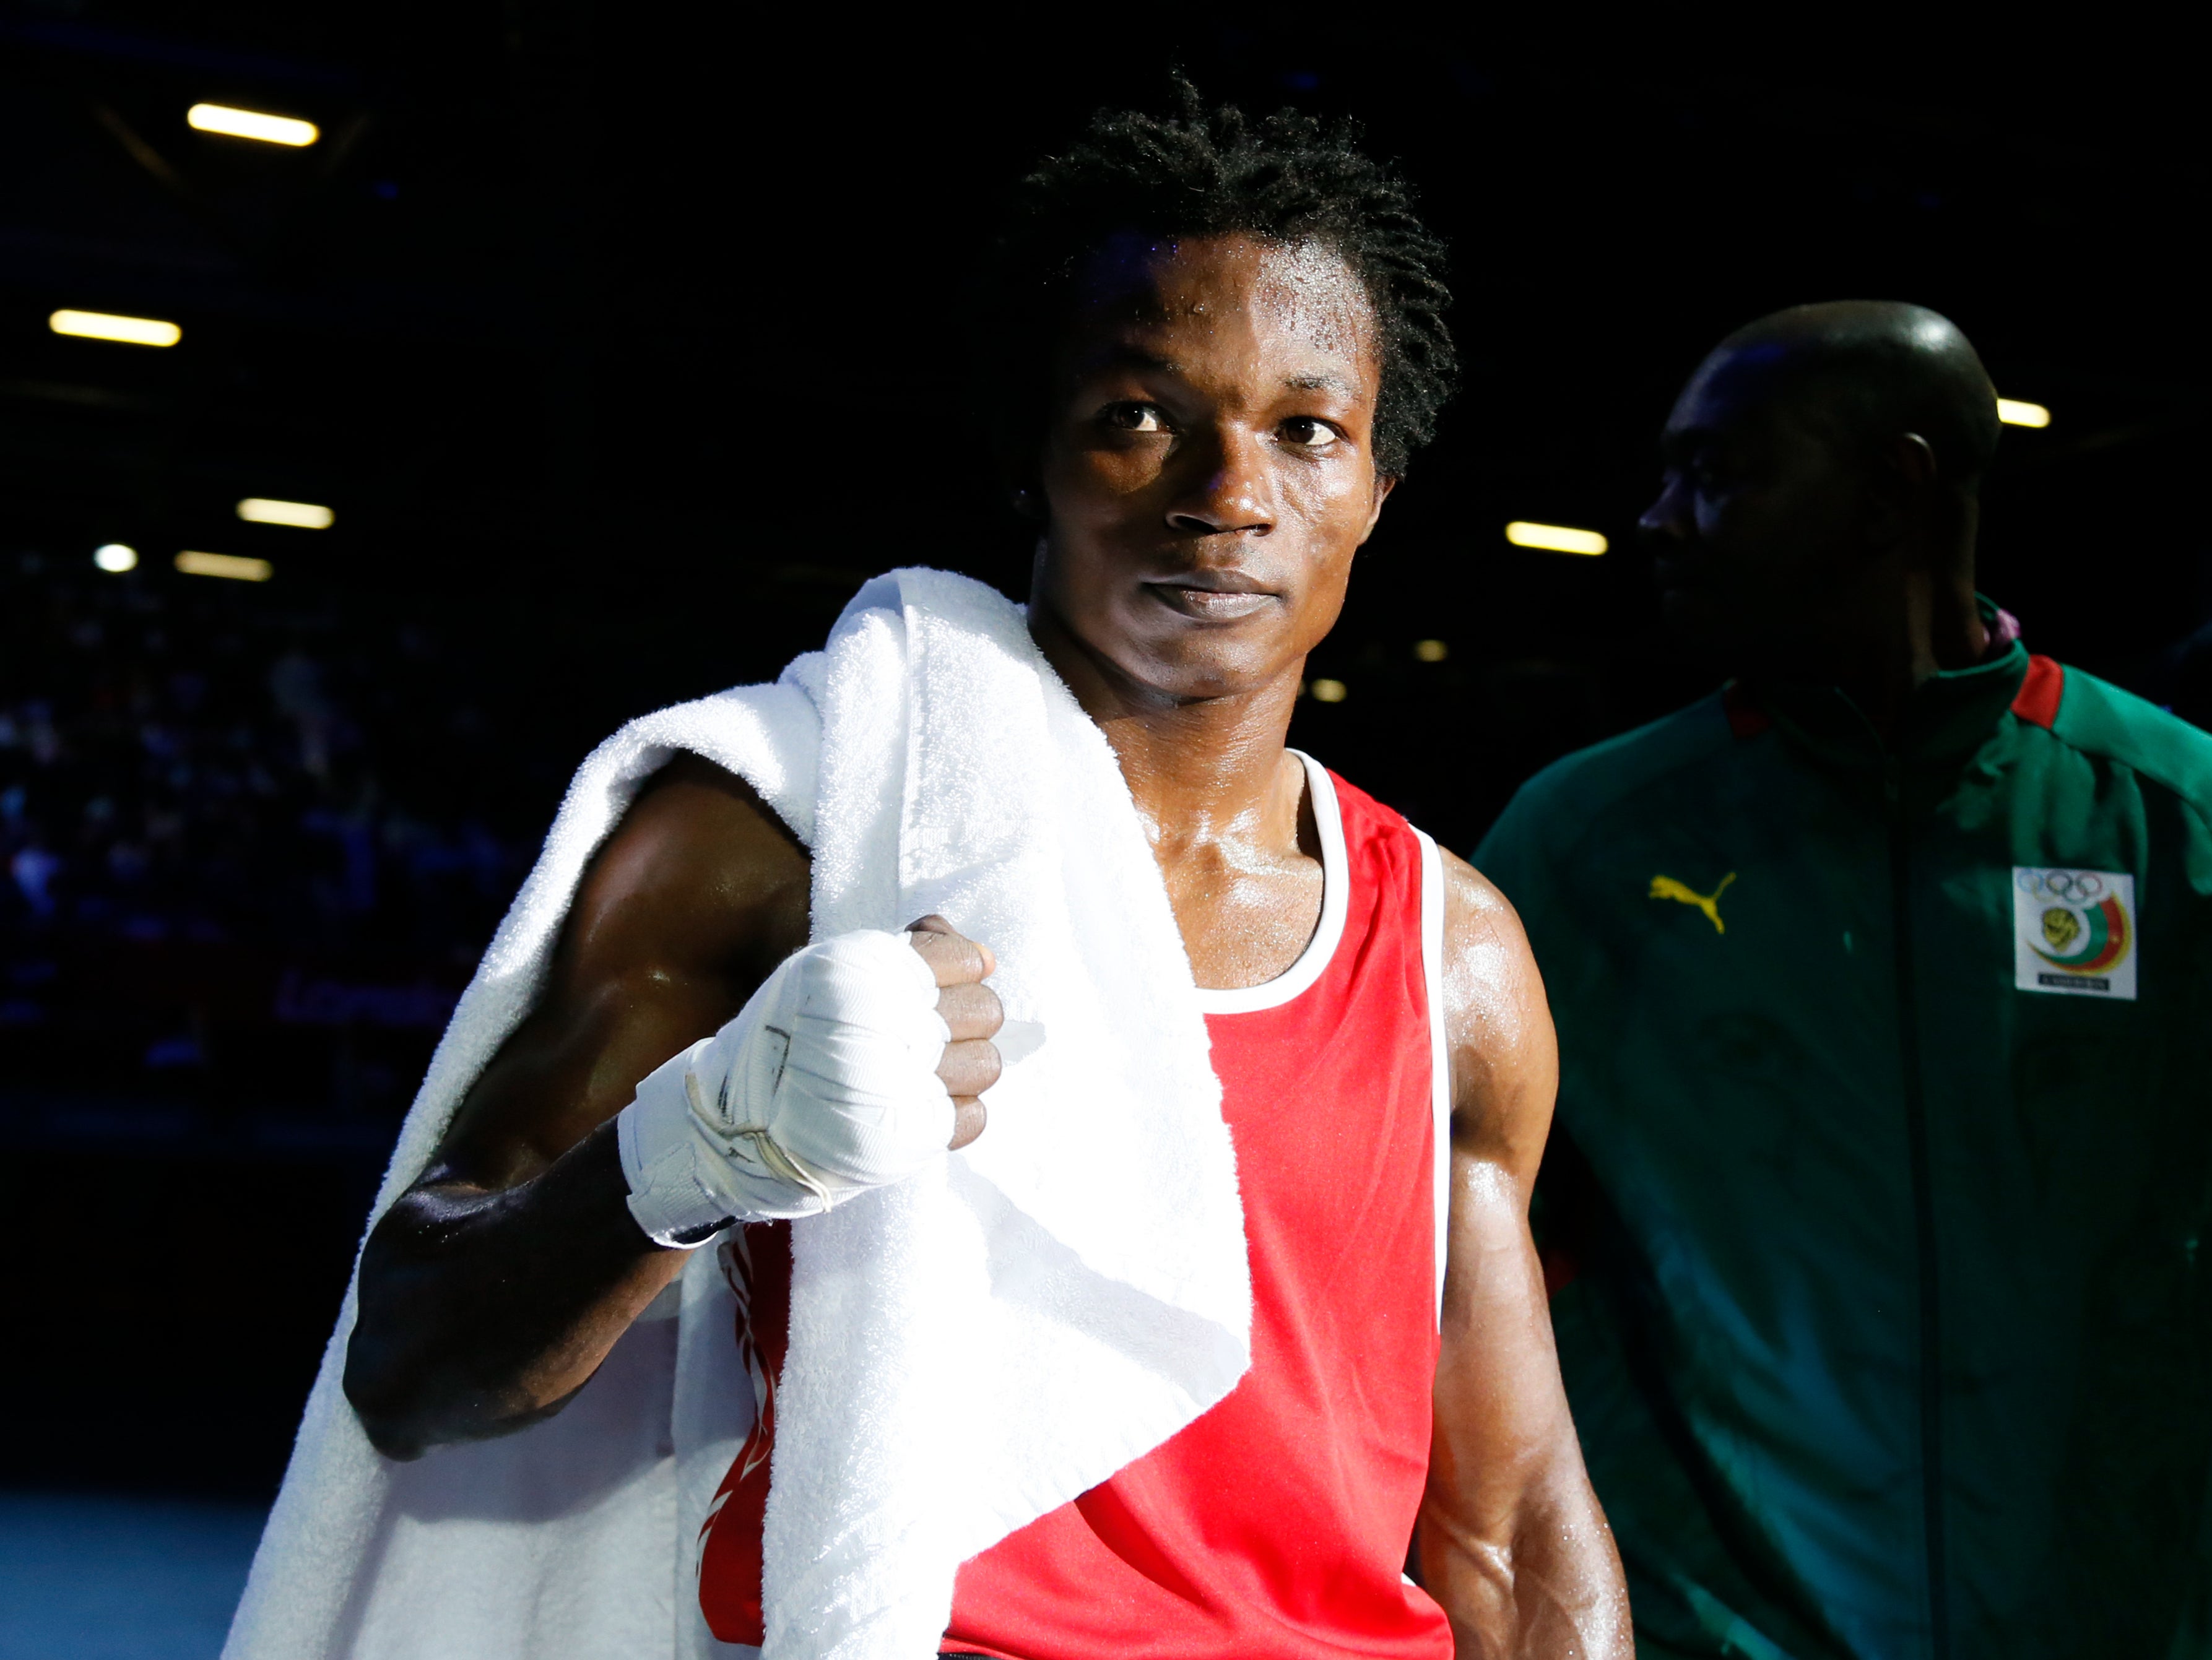 Thomas Essomba in 2012 following victory in his first bout at the Olympics